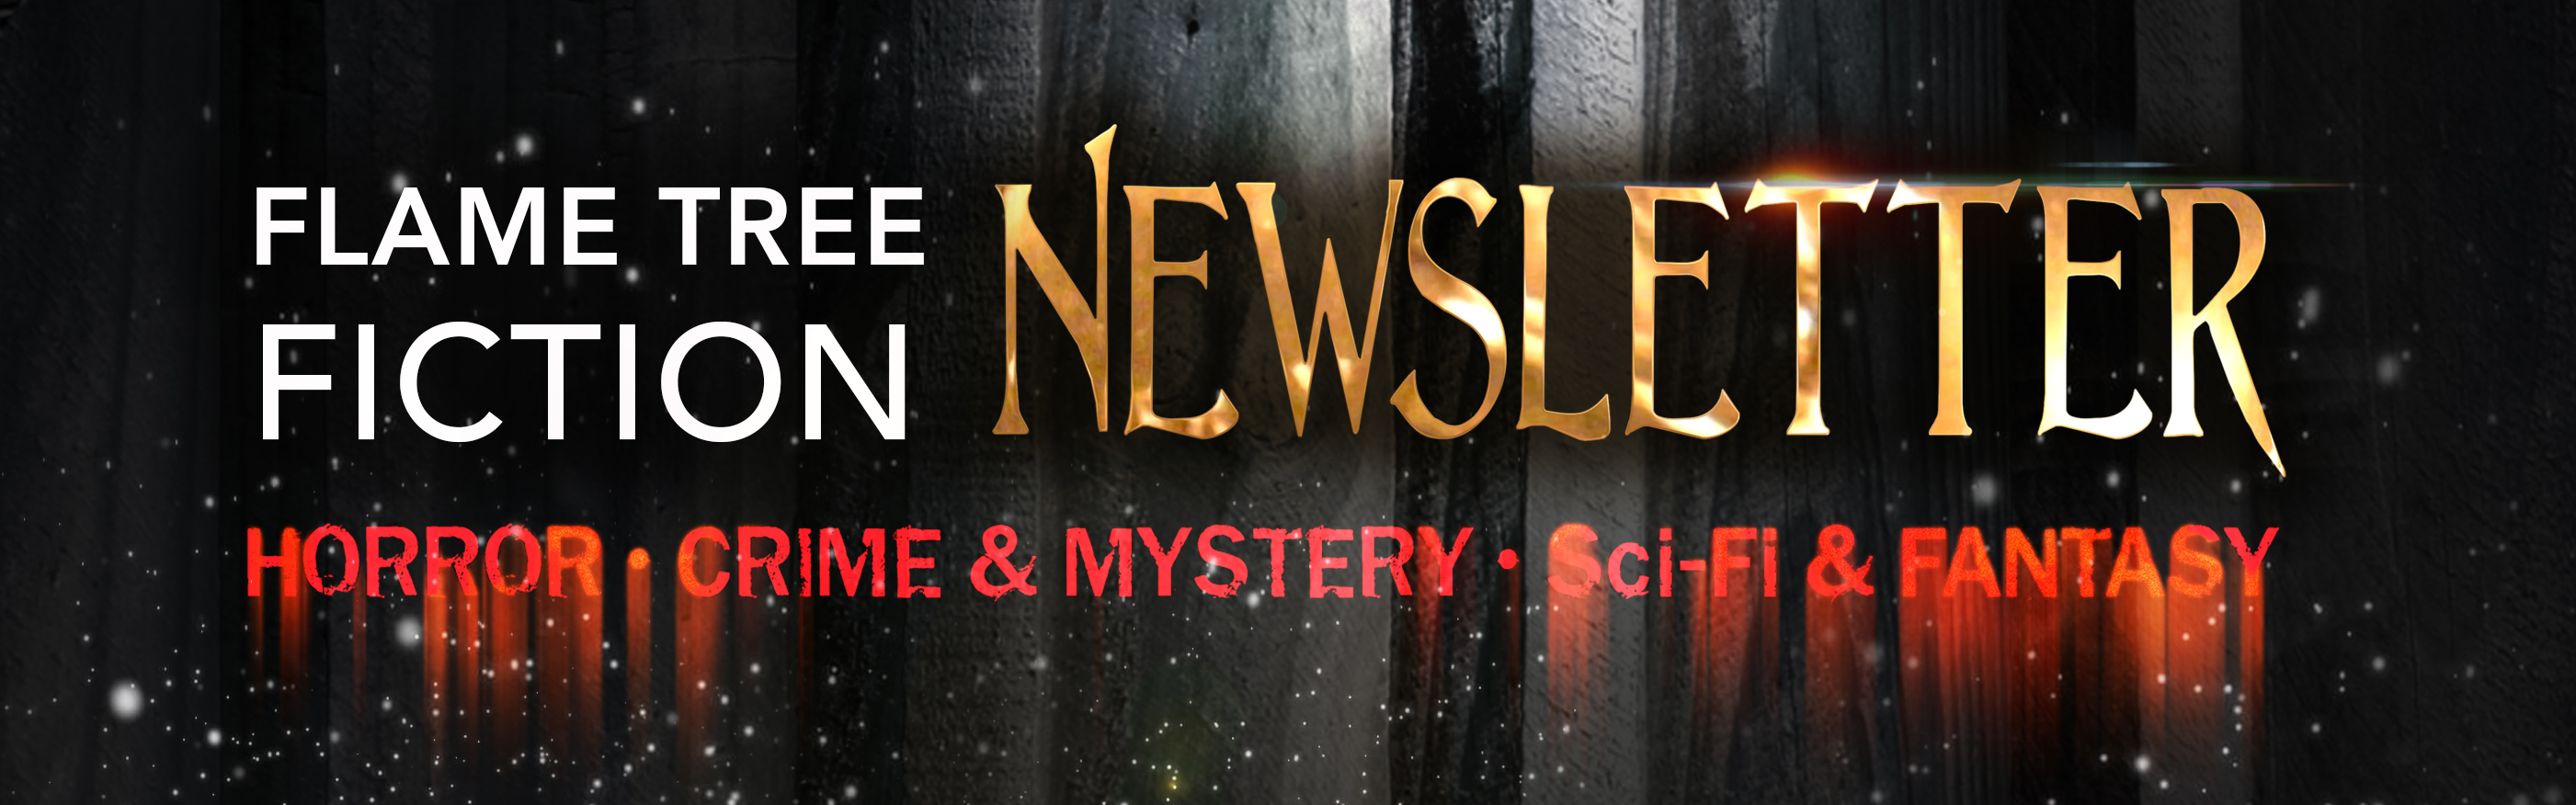 flame tree fiction newsletter